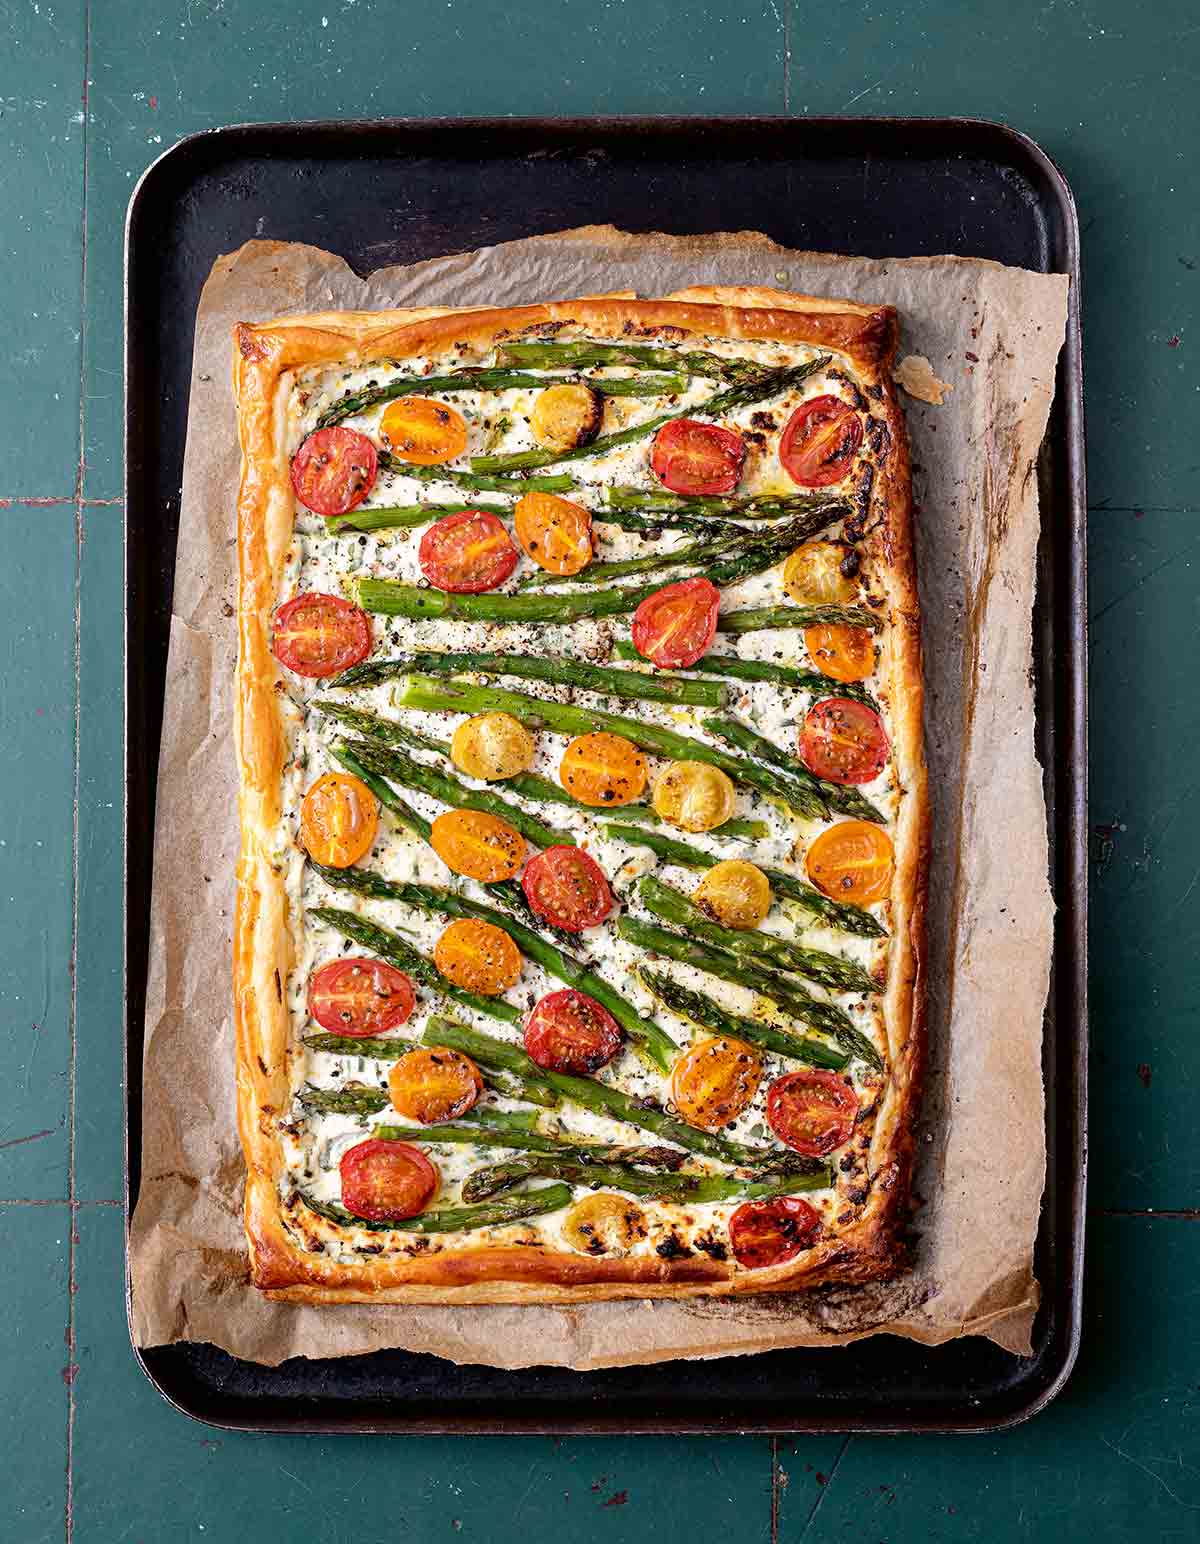 A puff pastry tart topped with ricotta, cherry tomatoes, and asparagus.